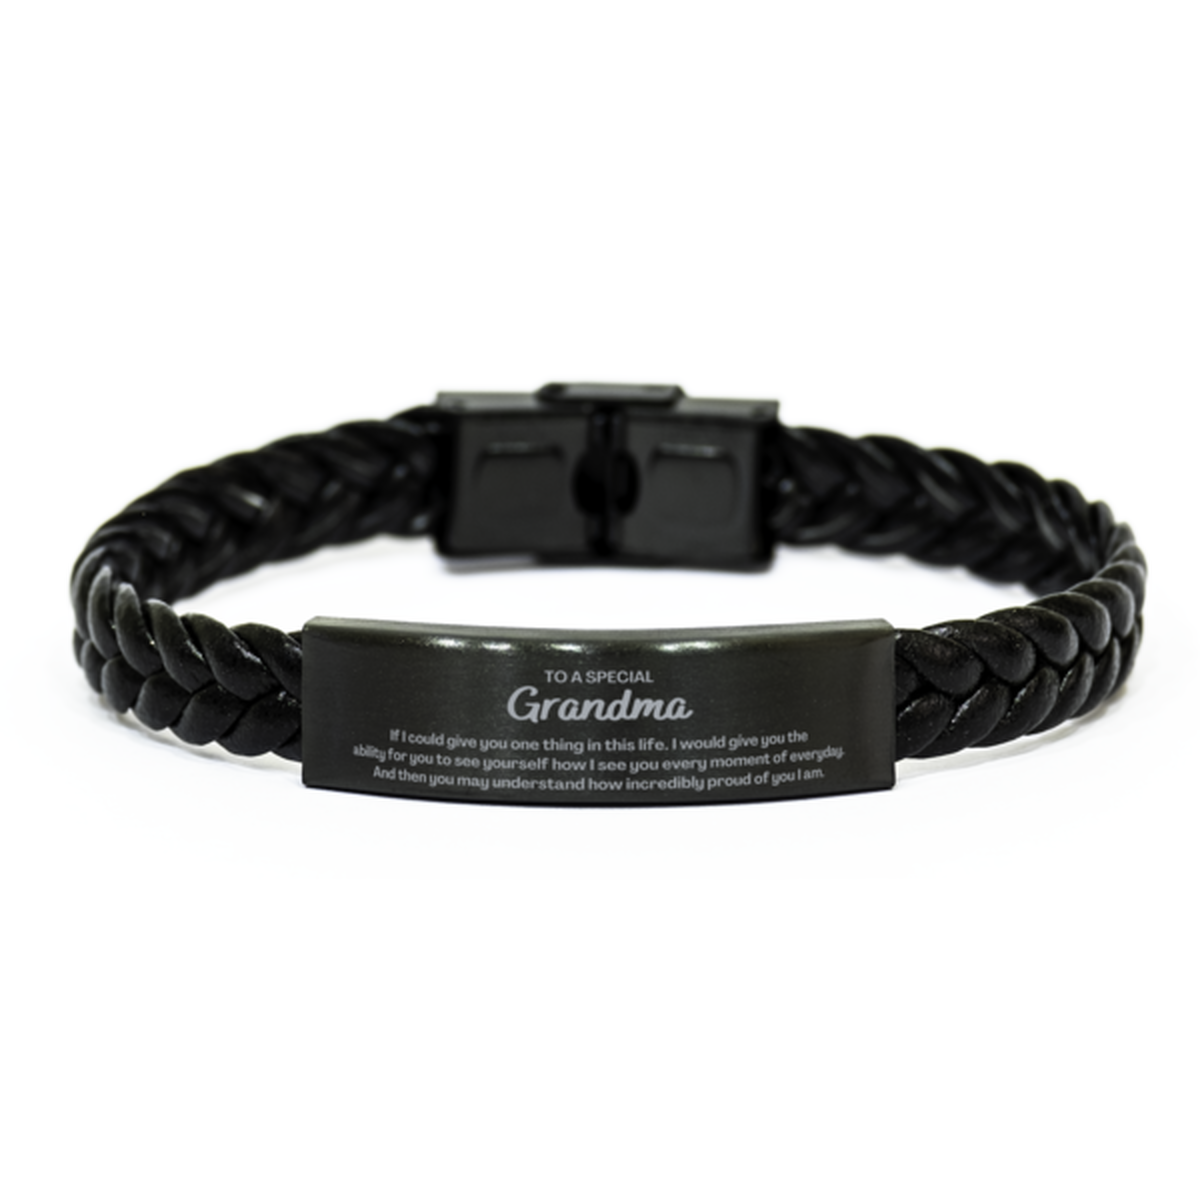 To My Grandma Braided Leather Bracelet, Gifts For Grandma Engraved, Inspirational Gifts for Christmas Birthday, Epic Gifts for Grandma To A Special Grandma how incredibly proud of you I am